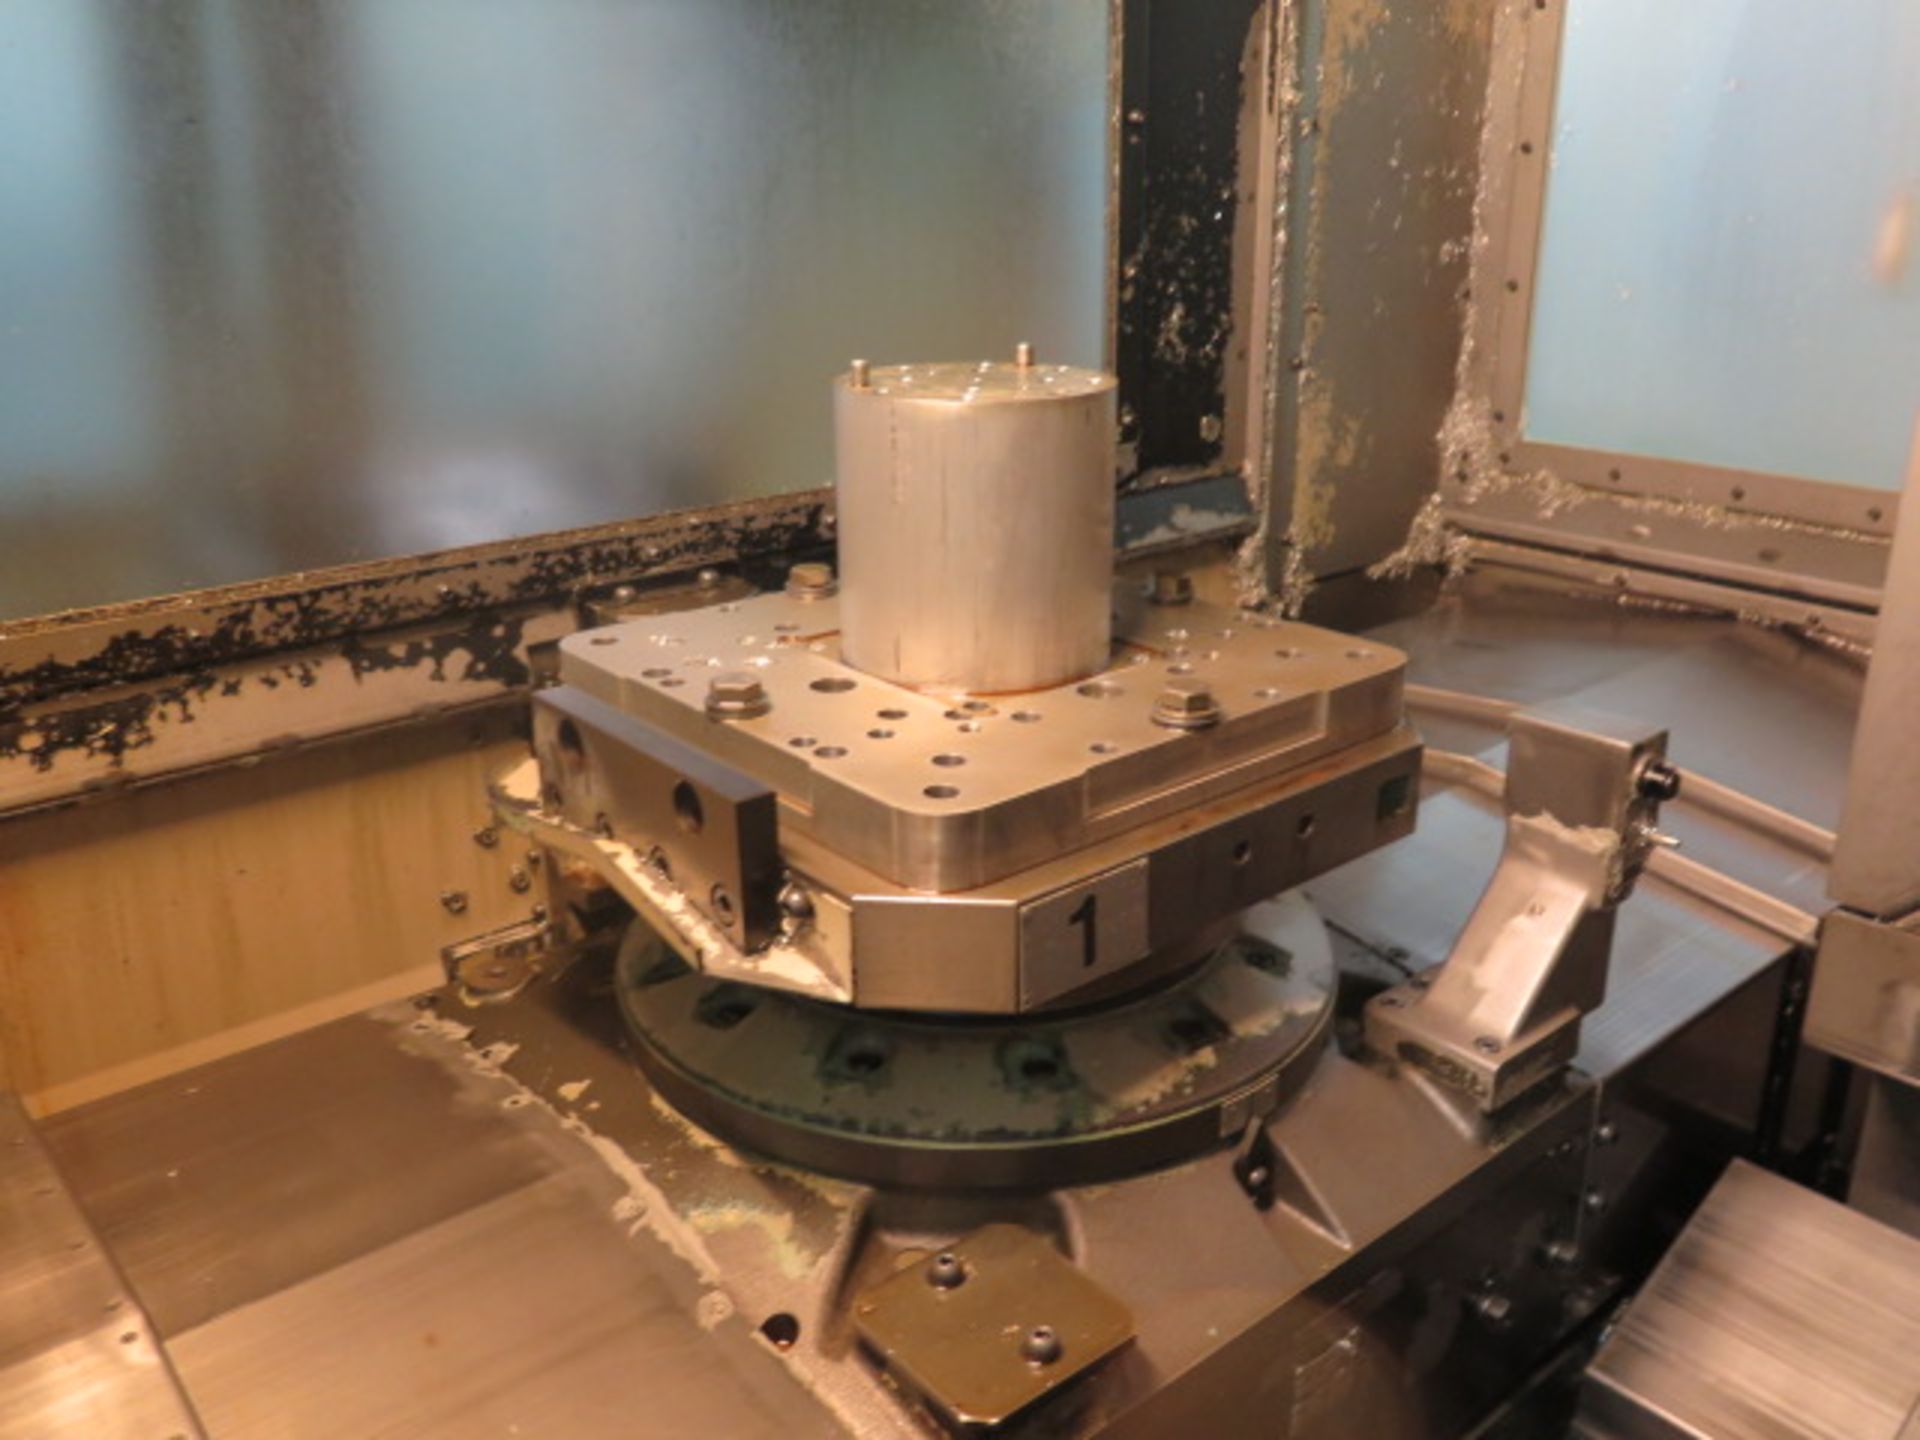 Hitachi Seiki HG400 III 2-Pallet 4-Axis CNC Horizontal Machining Center s/n HG43622 w/ SOLD AS IS - Image 4 of 25